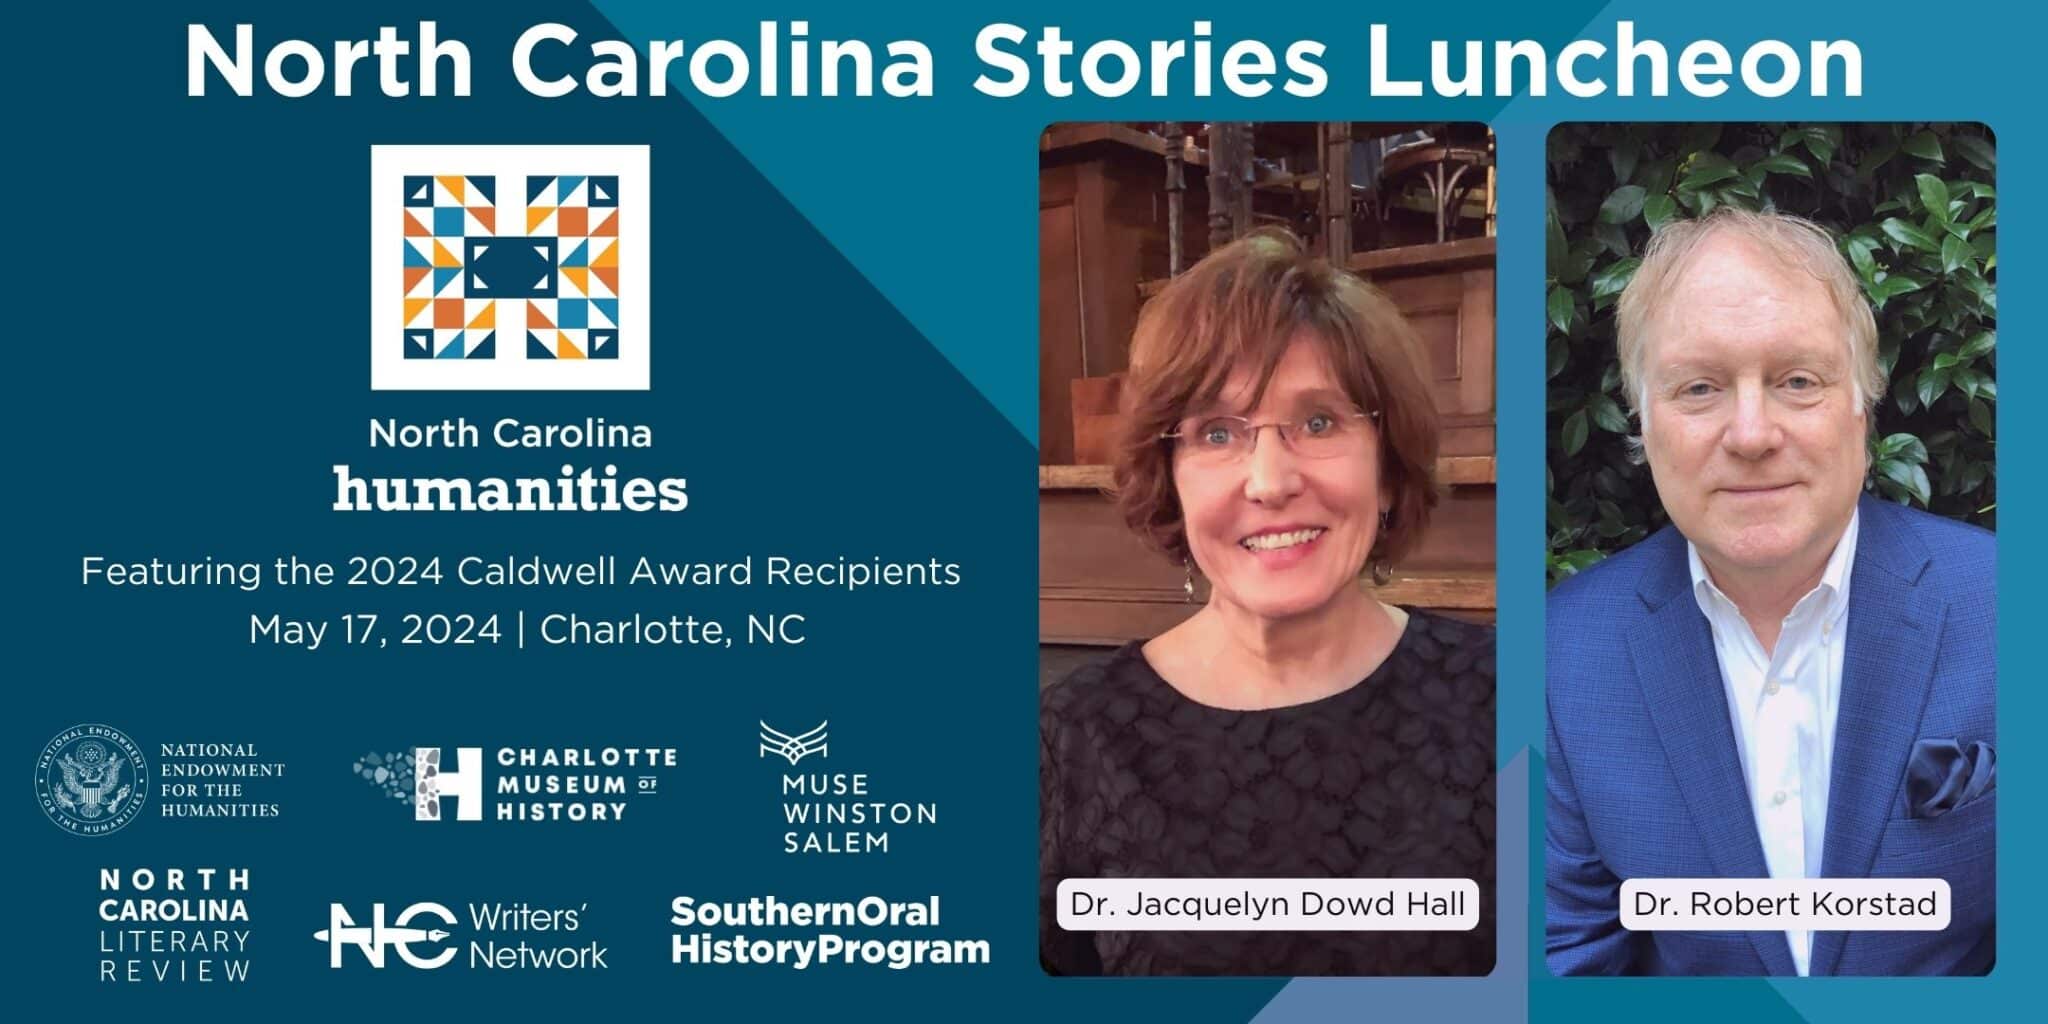 NC Stories Promo Image with Headshot and Sponsor Logos